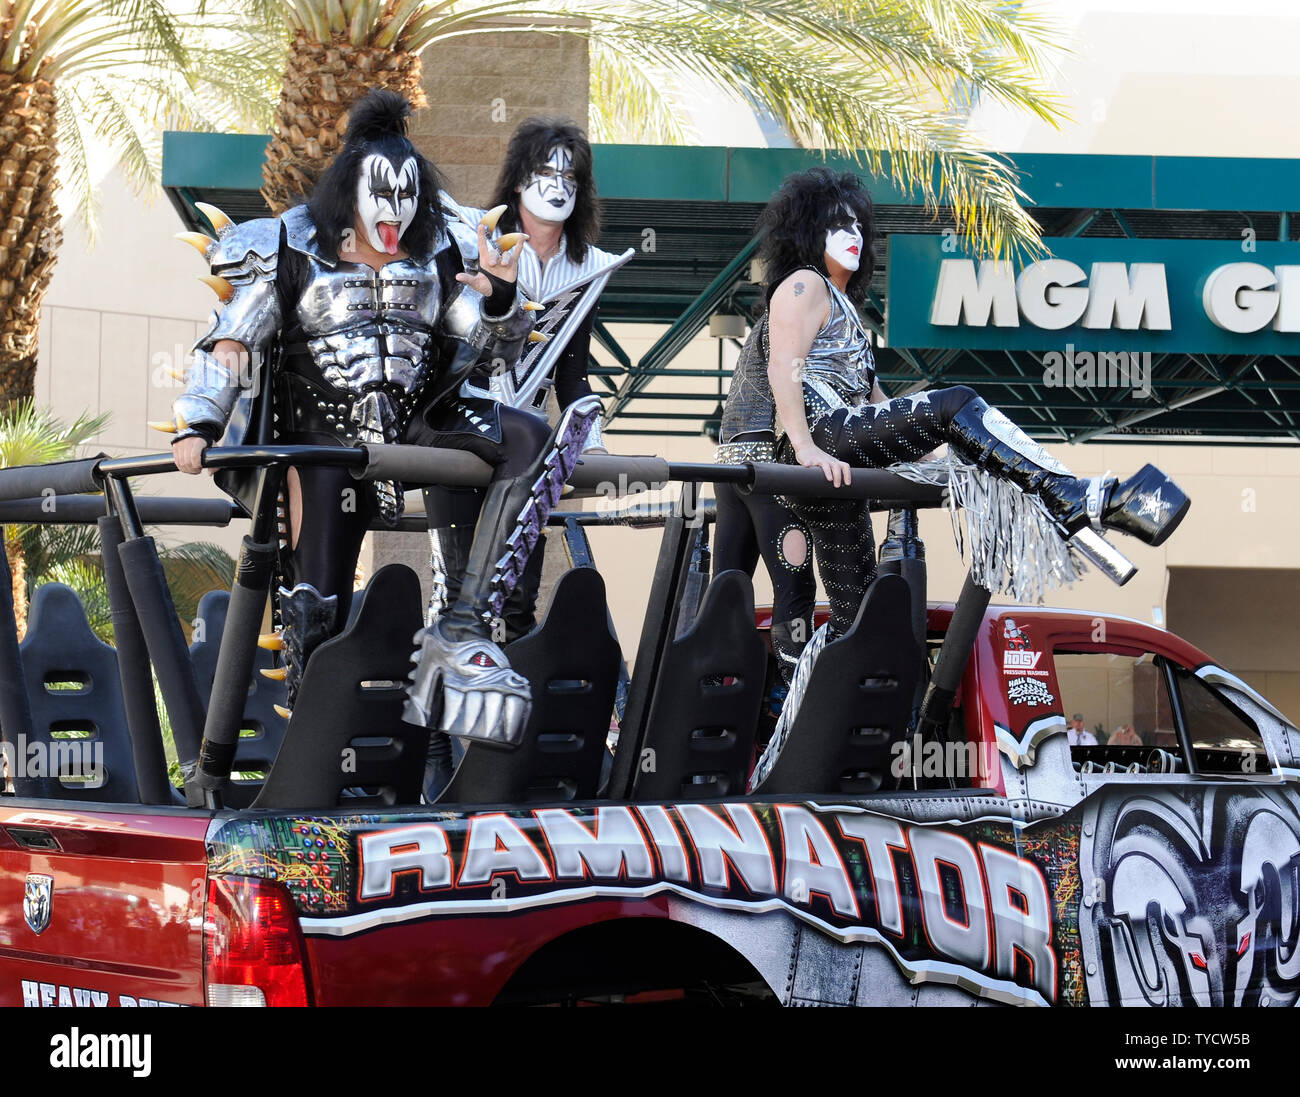 (L-R) Musicians Gene Simmons, Tommy Thayer, and Paul Stanley of the band KISS arrive at the 47th annual Academy of Country Music Awards at the MGM Hotel in Las Vegas, Nevada on April 1, 2012.  UPI/David Becker Stock Photo